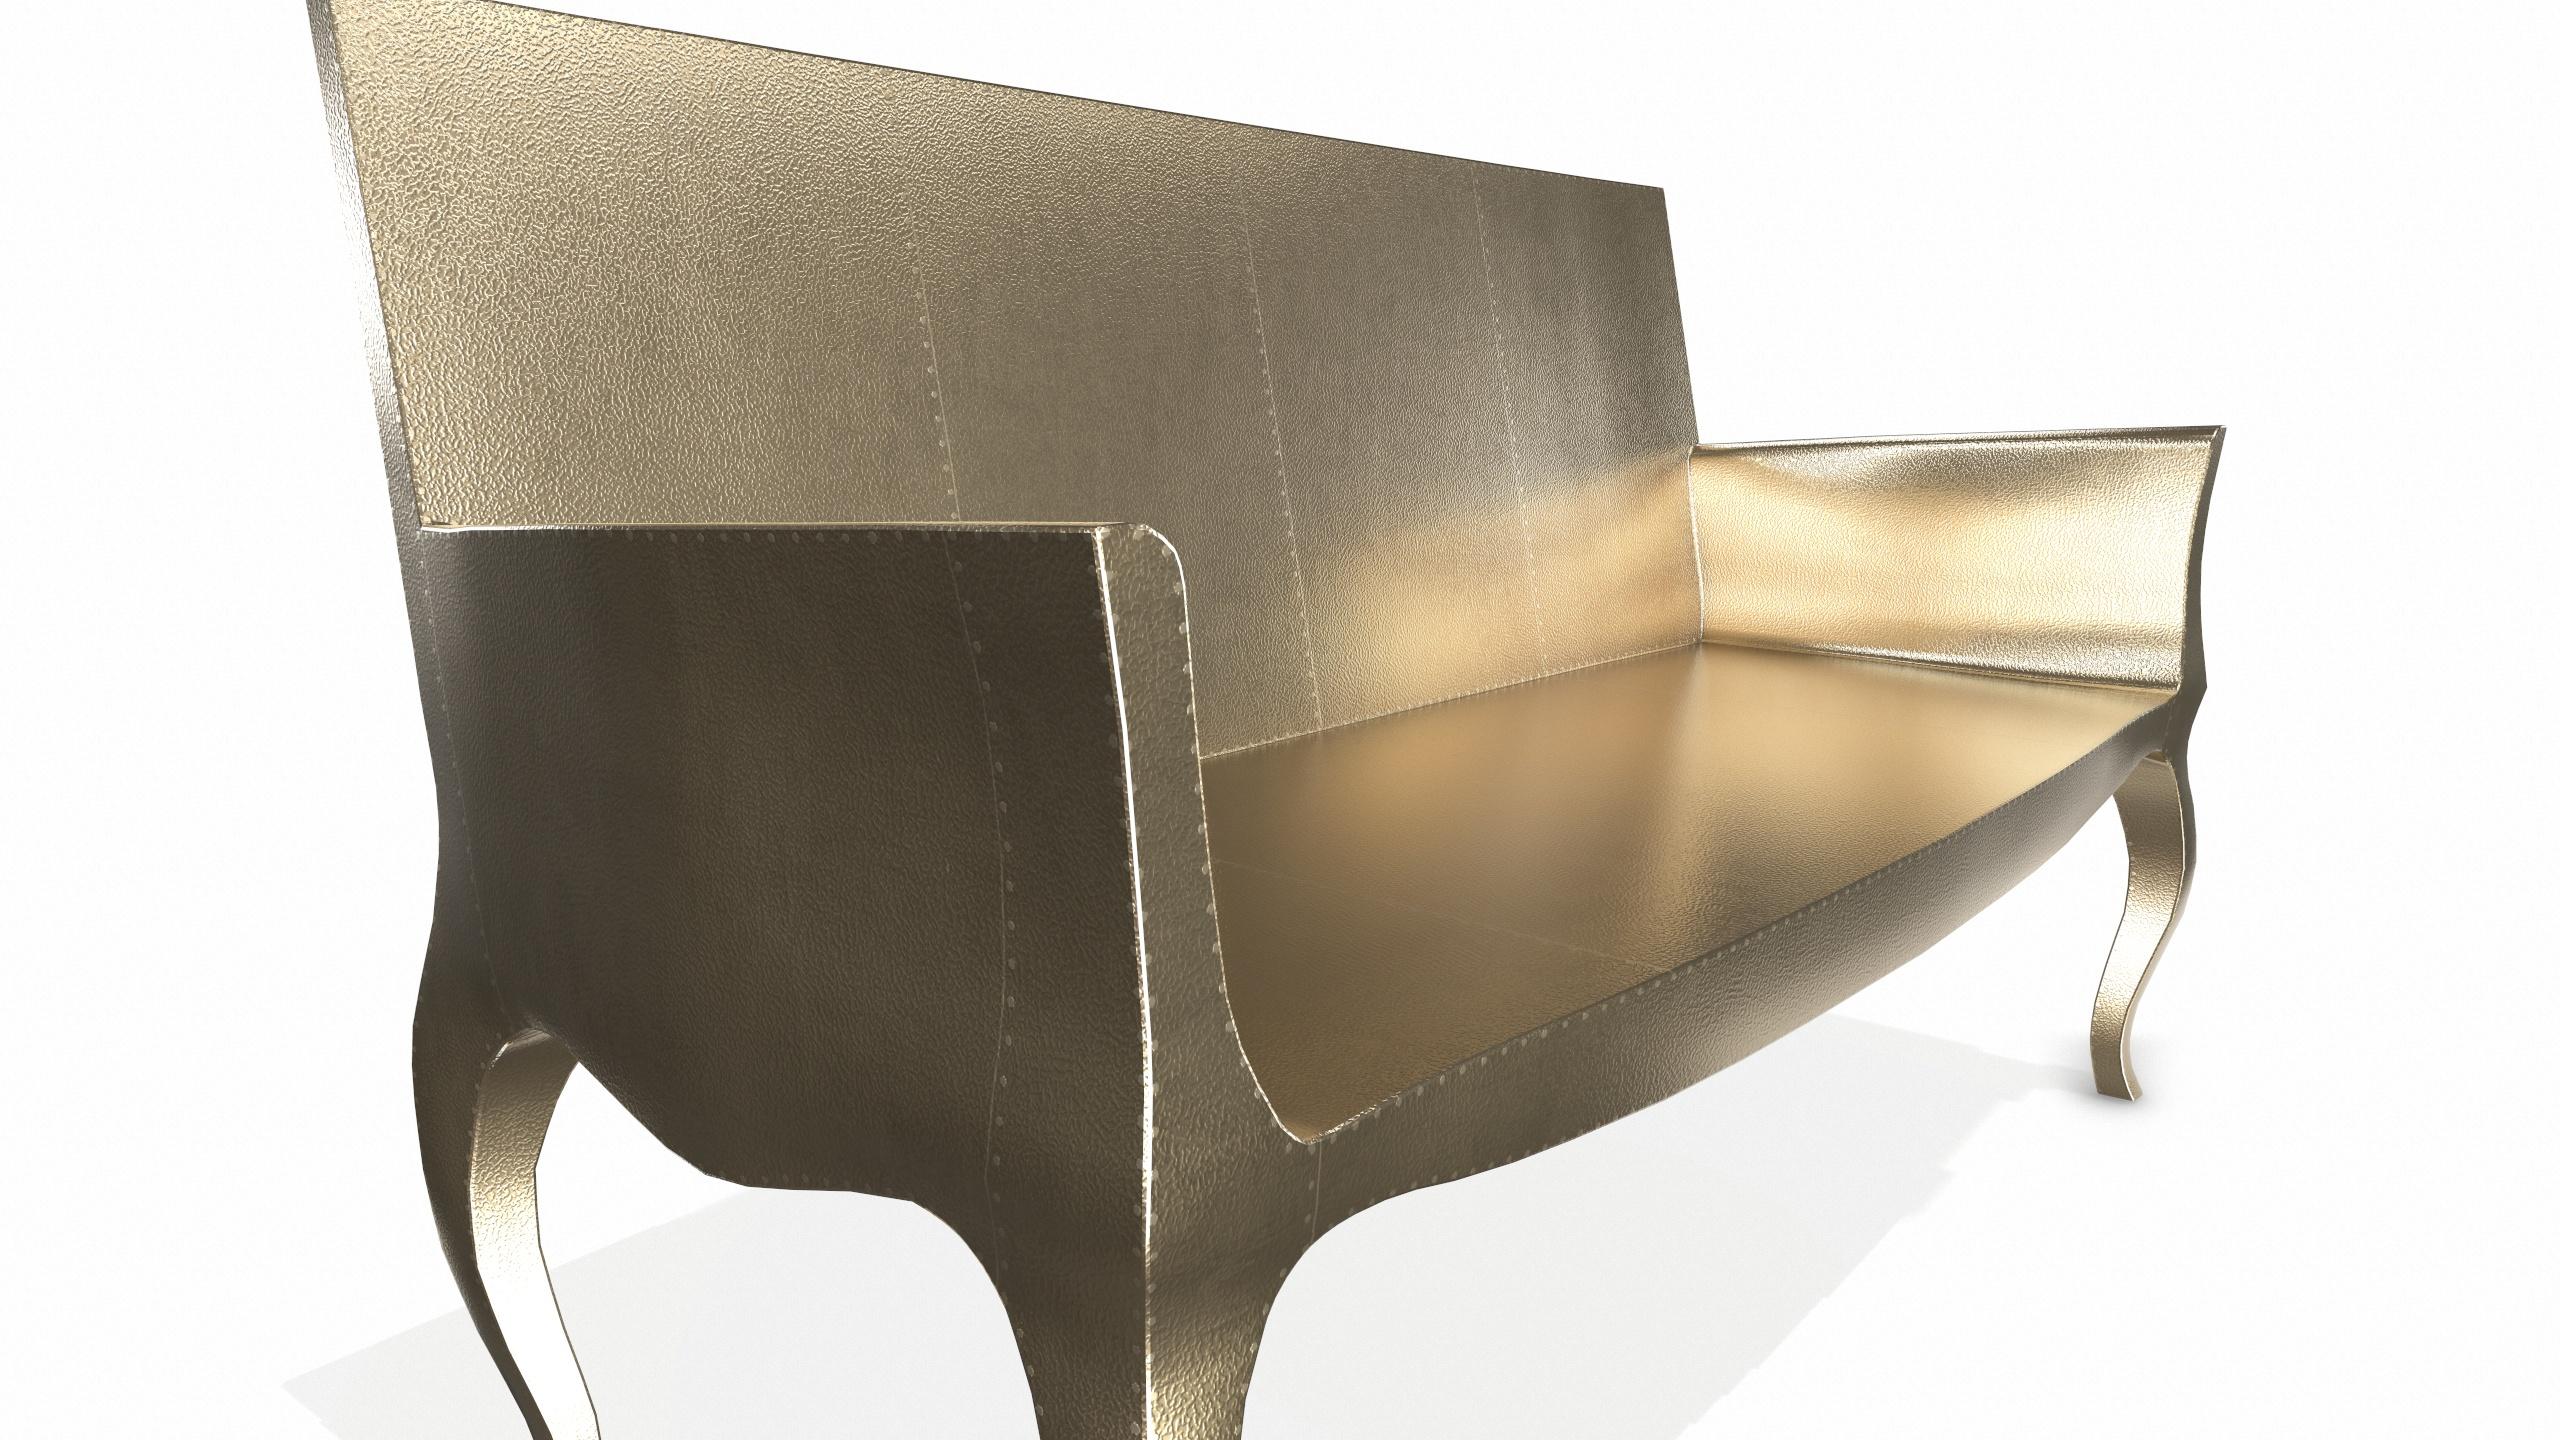 American Louise Settee Art Deco Benches in Fine Hammered Brass by Paul Mathieu For Sale